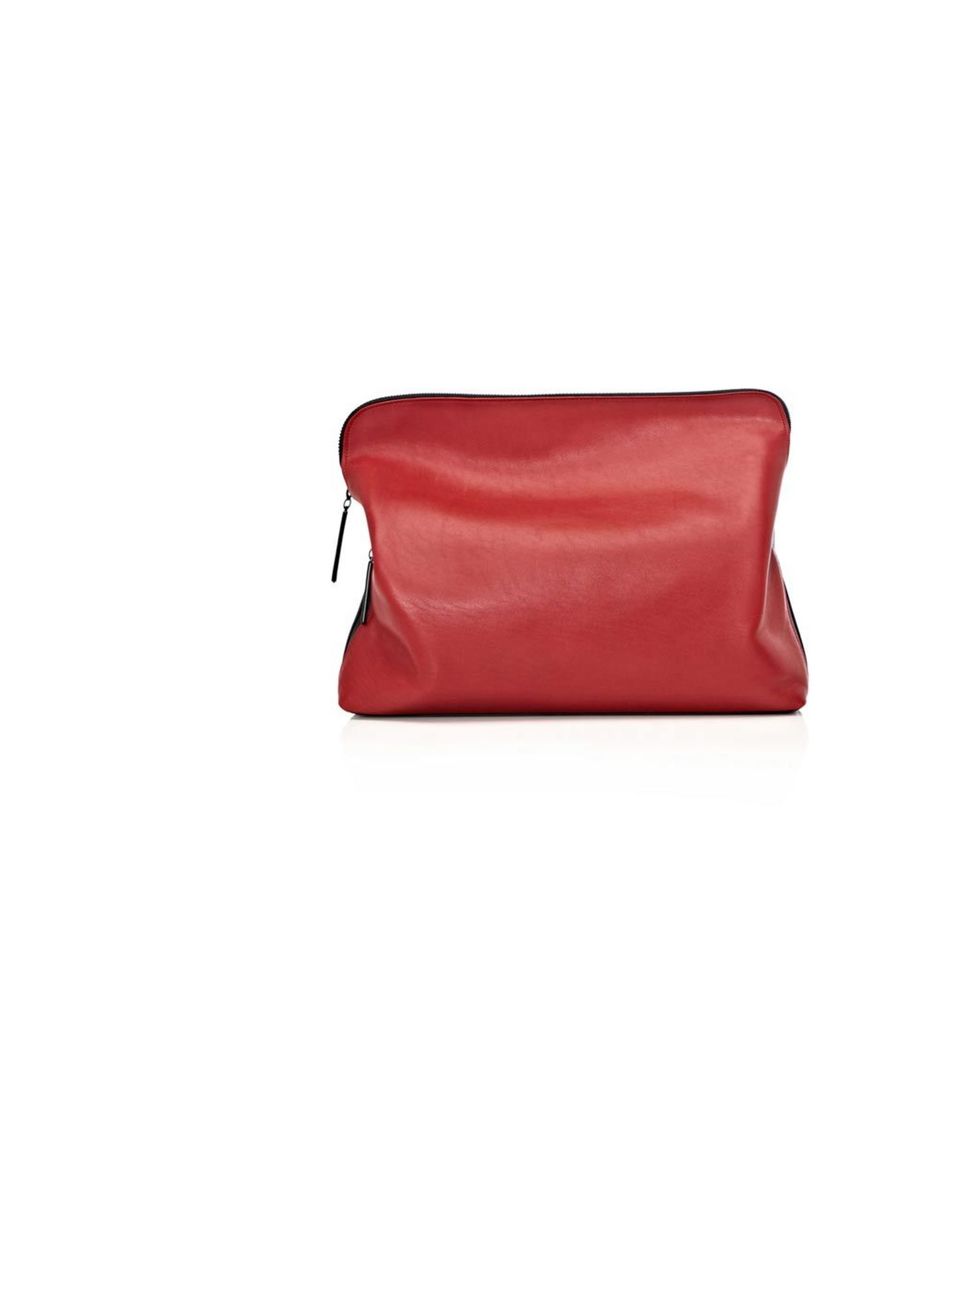 <p>3.1 Phillip Lim '31 Minute' bi-colour bag, £415, Available from <a href="http://www.matchesfashion.com/product/125552">Matches Fashion</a></p>